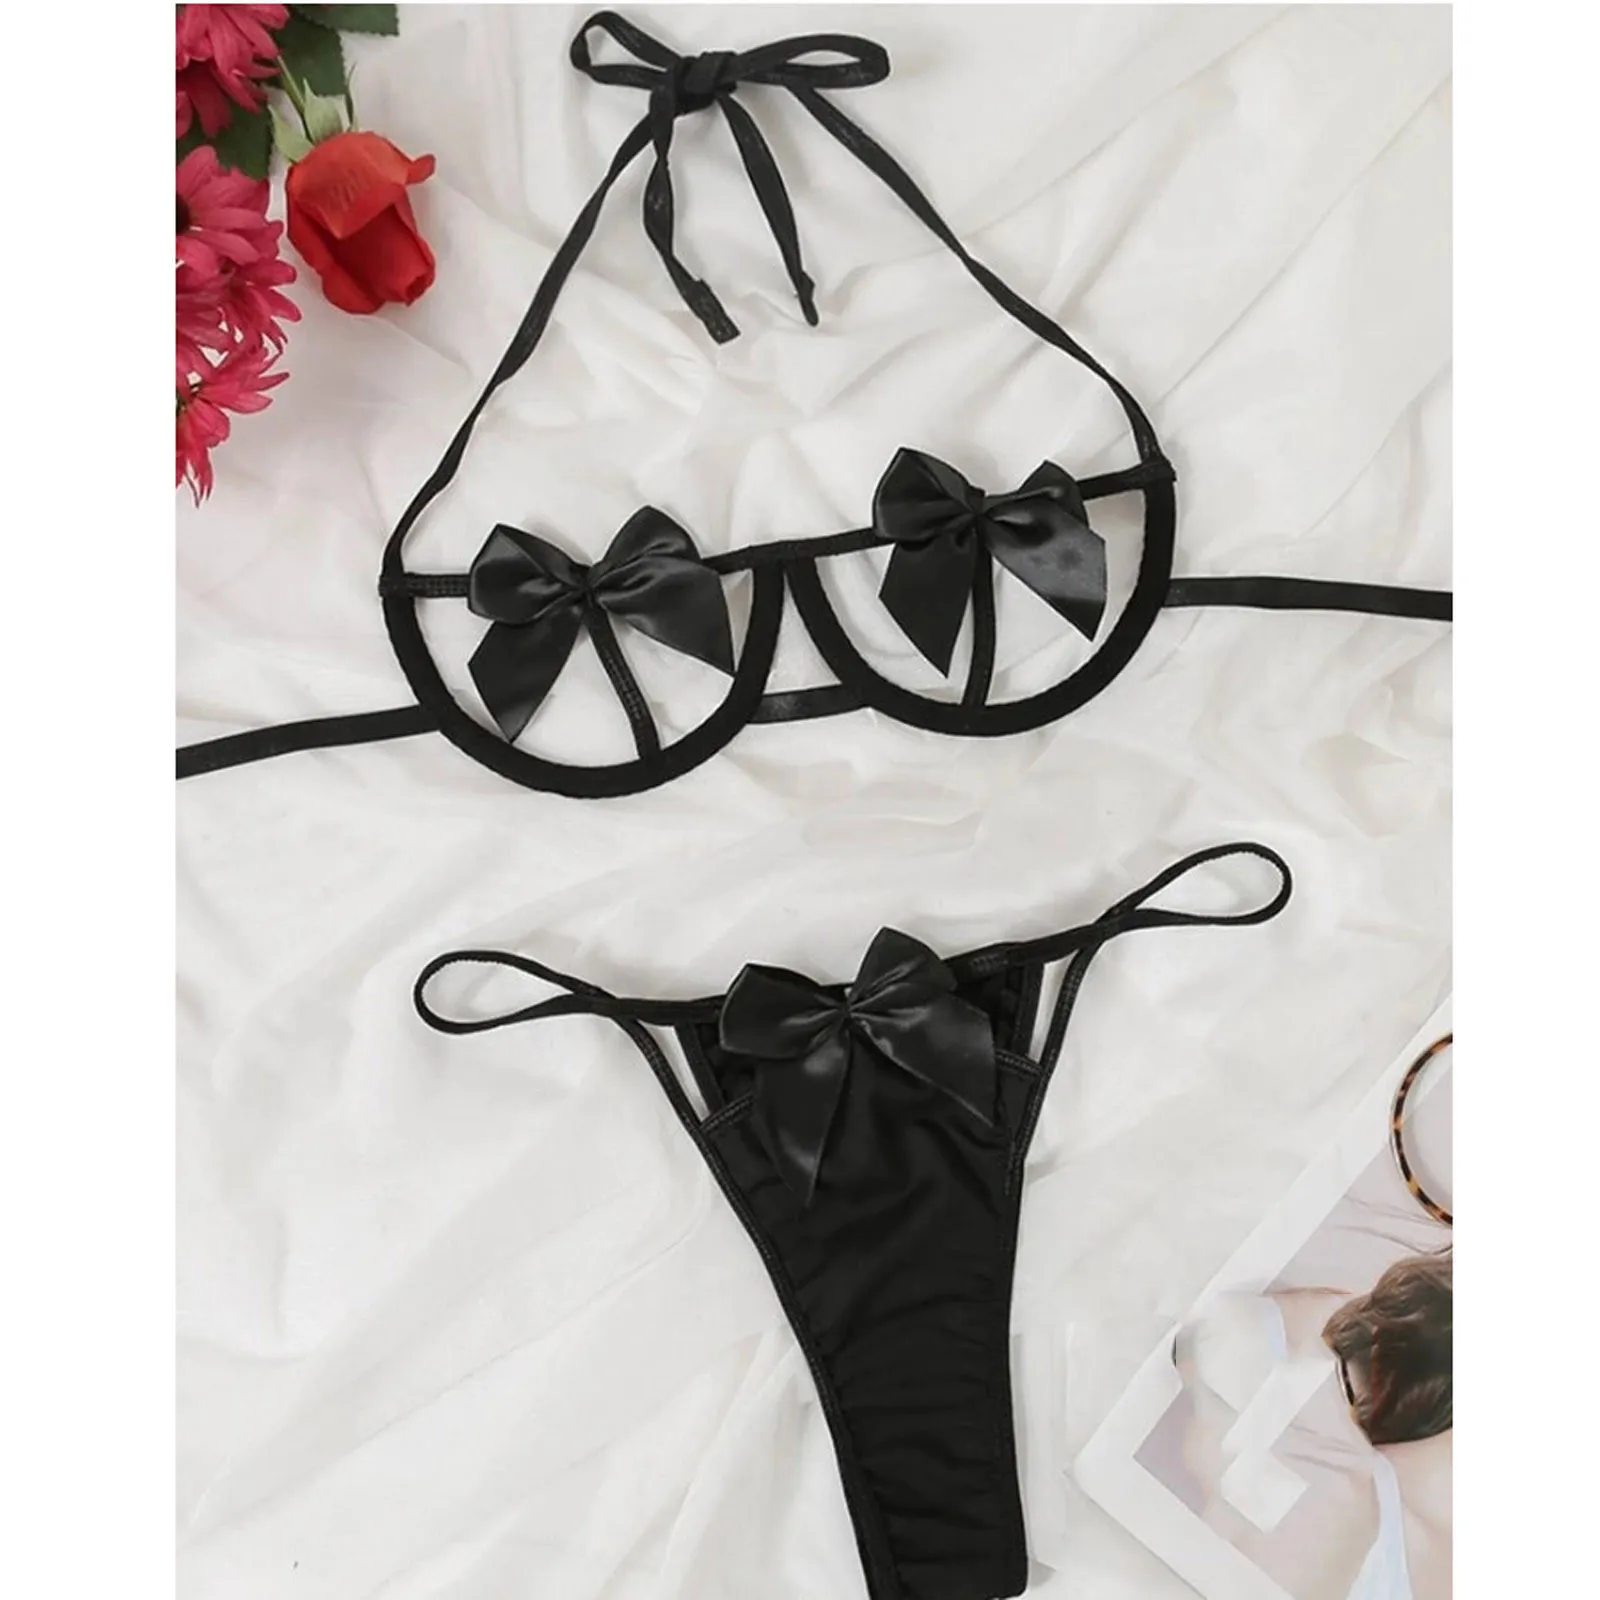 sexy bra set Sexy Lingerie Women's Bow Cut Out Bras Thong Underwear Sets Solid G String Sensual Lingerie Women Seamless Sexy Underwear Sets bra sets